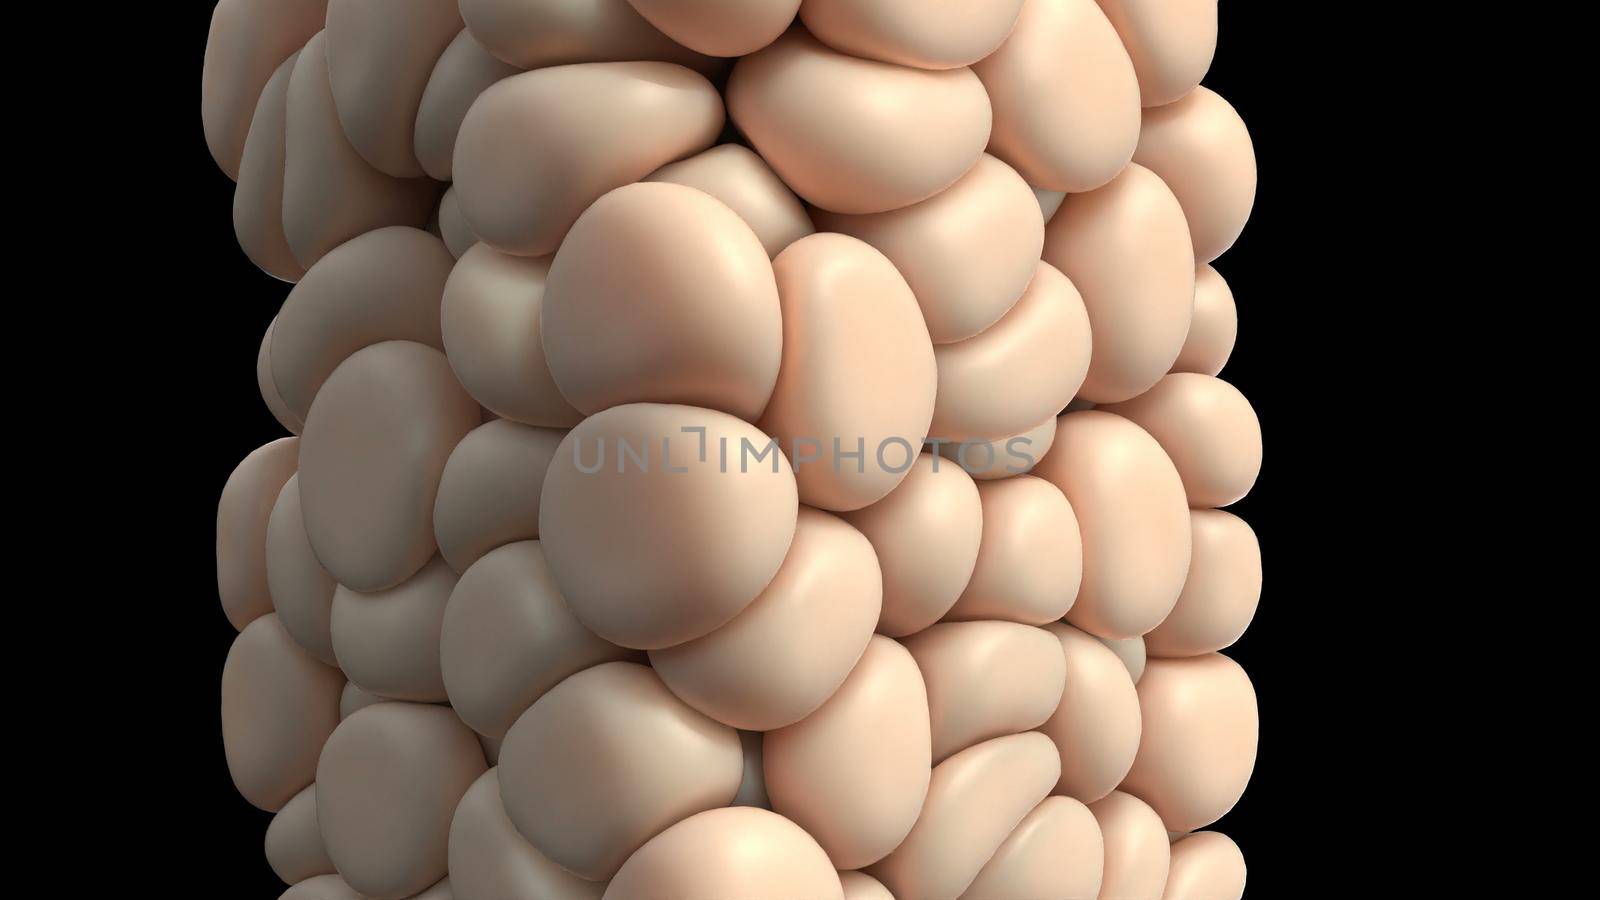 Fat cell medical tissue design Science Human health Atherosclerosis skin care 3d render